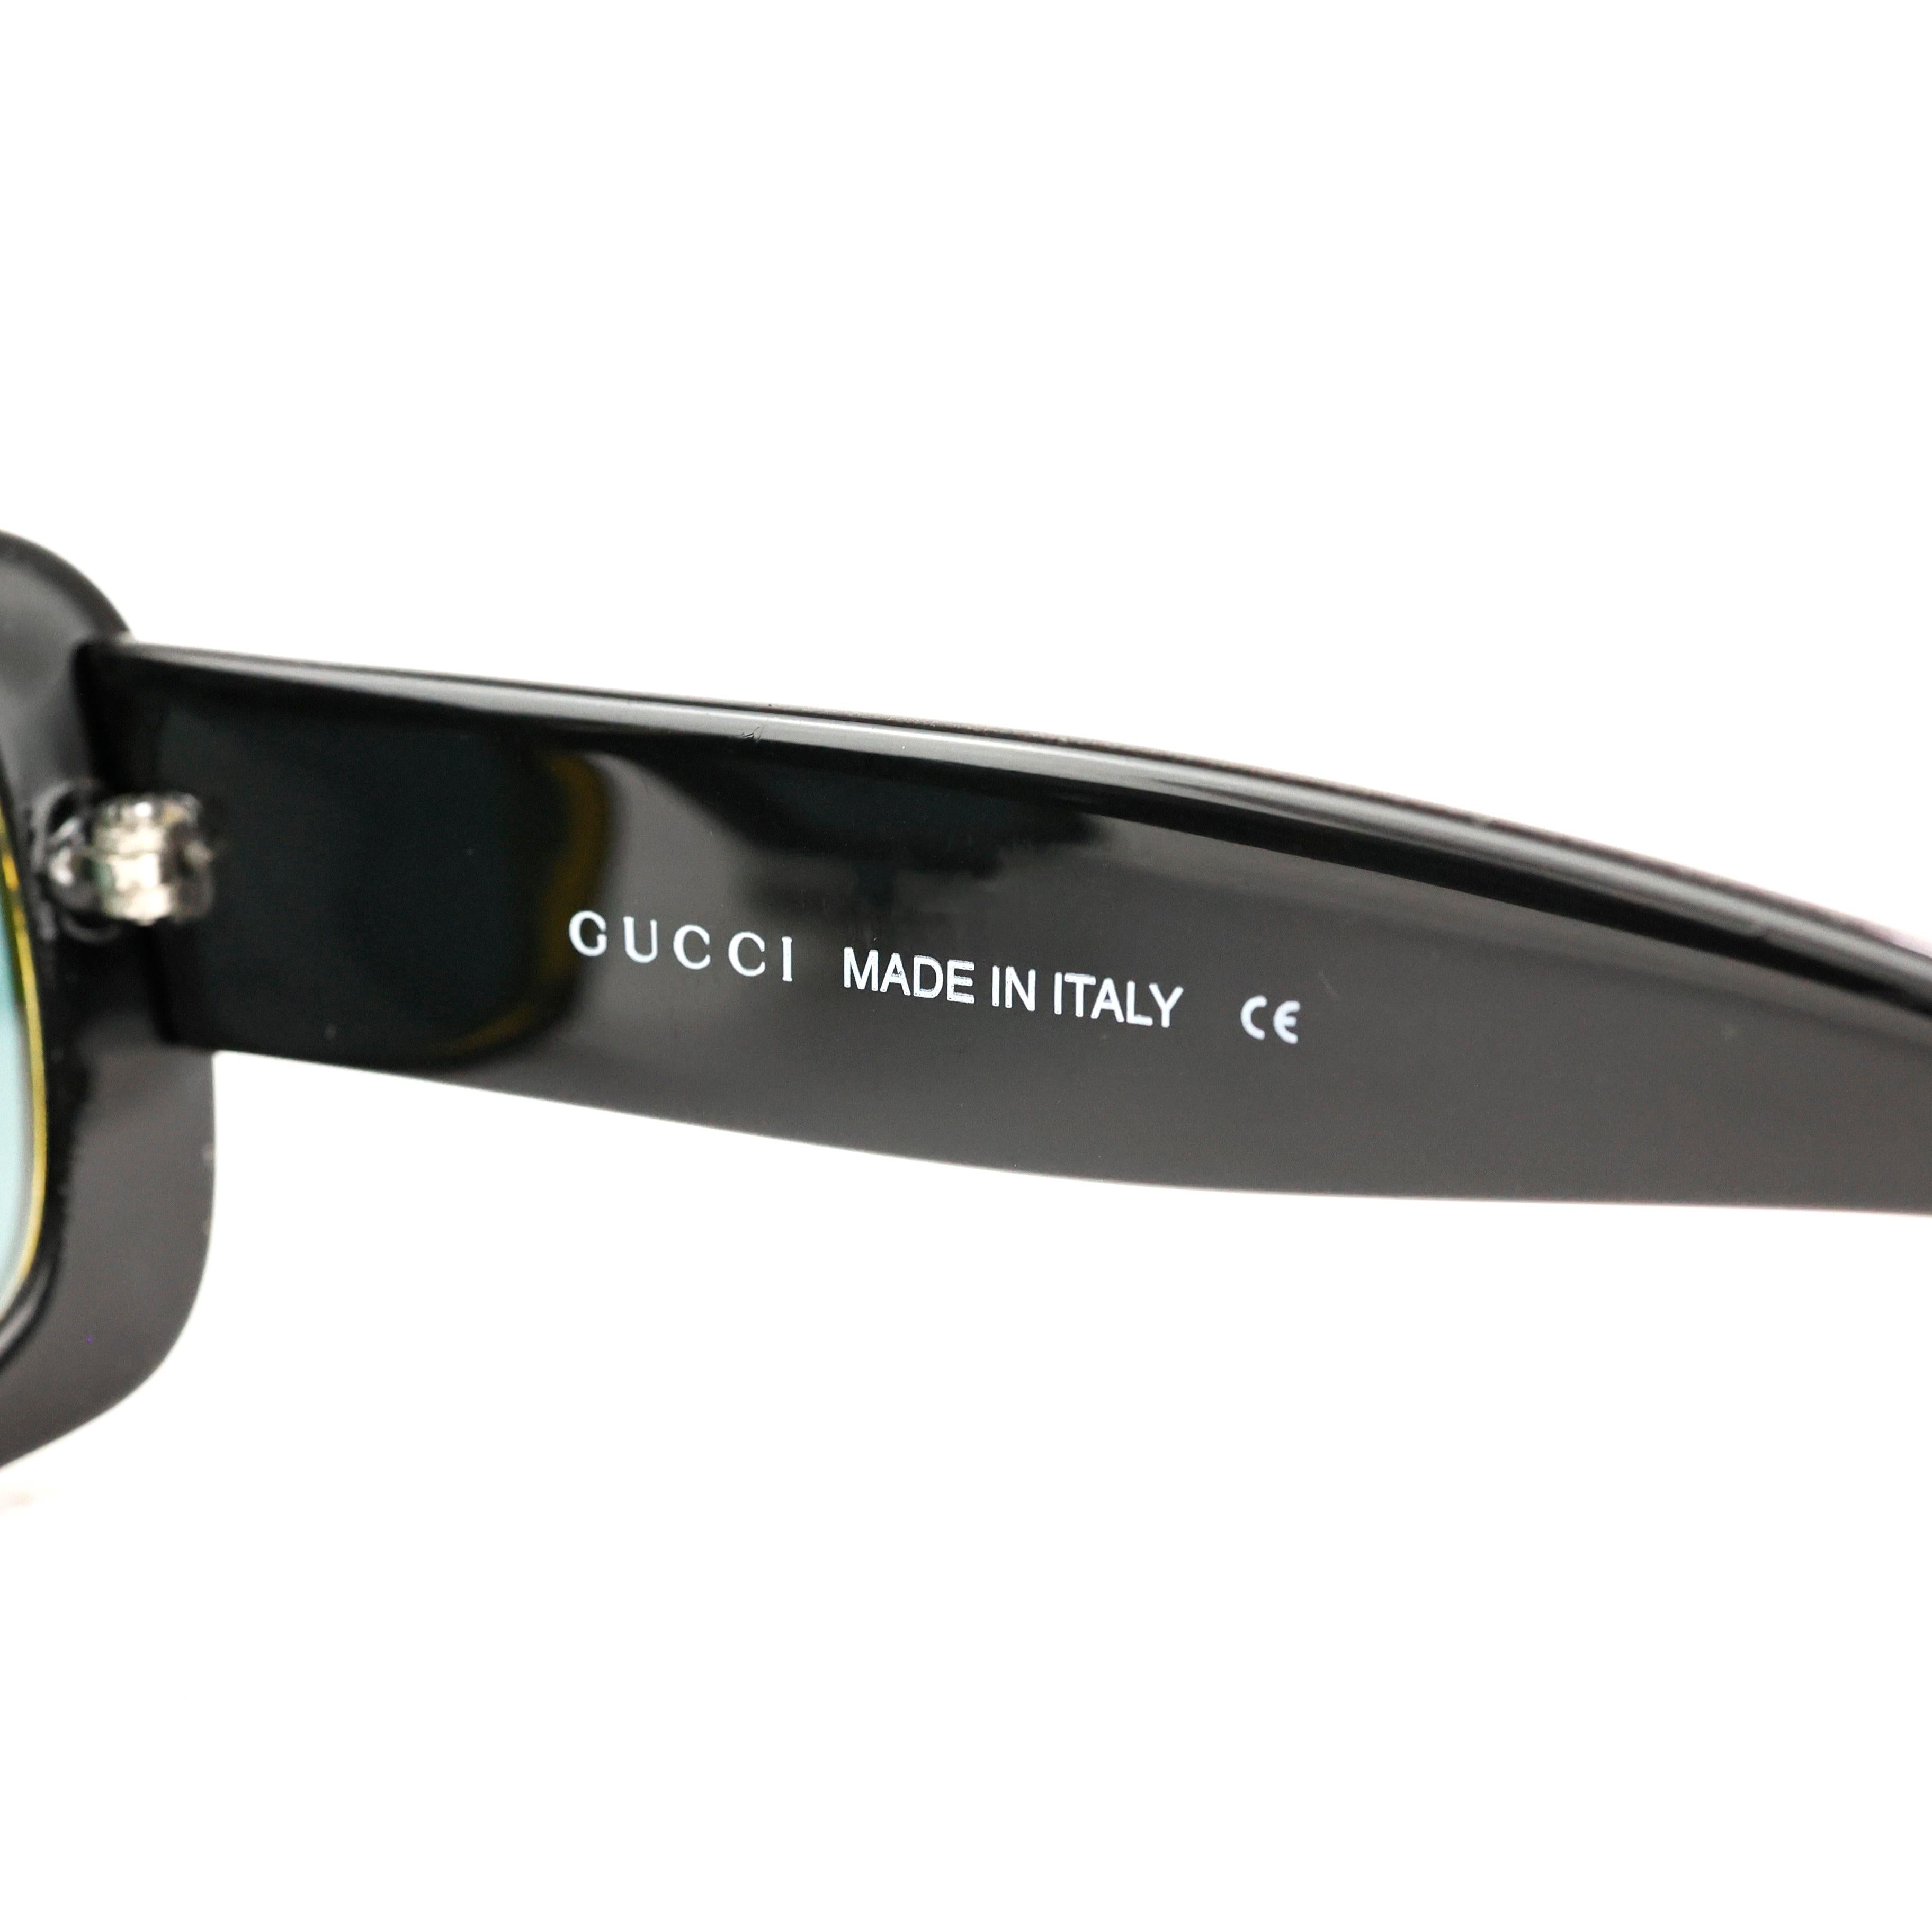 Gucci by Tom Ford 90s Sunglasses In Excellent Condition For Sale In Bressanone, IT